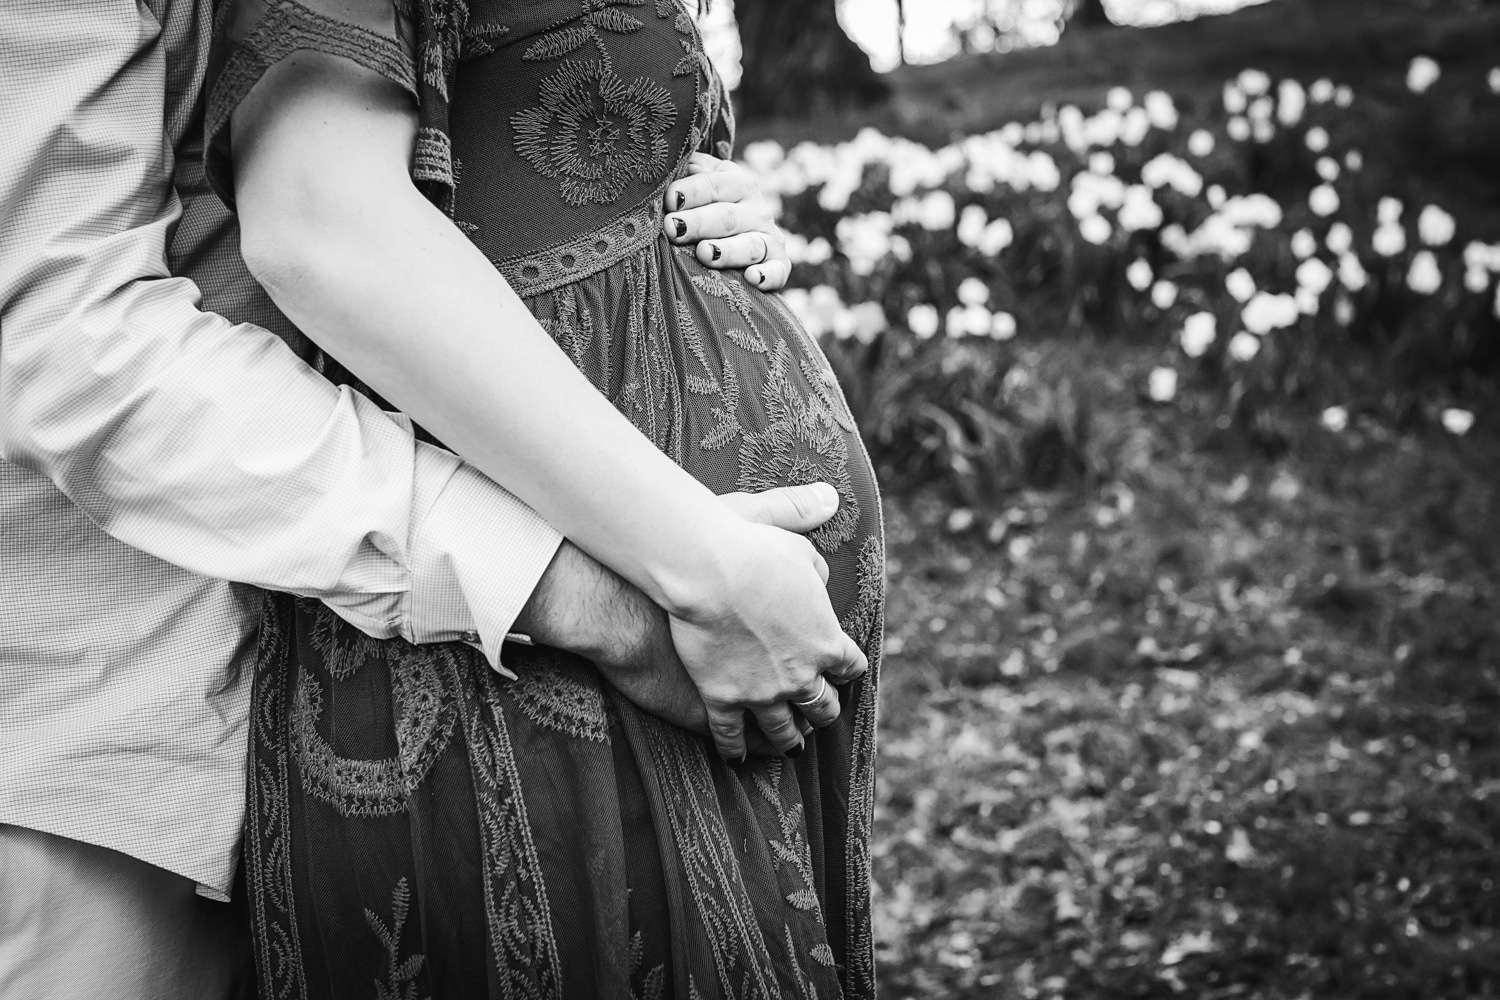 maternity photographer in rochester ny captures expectant mom in highland park